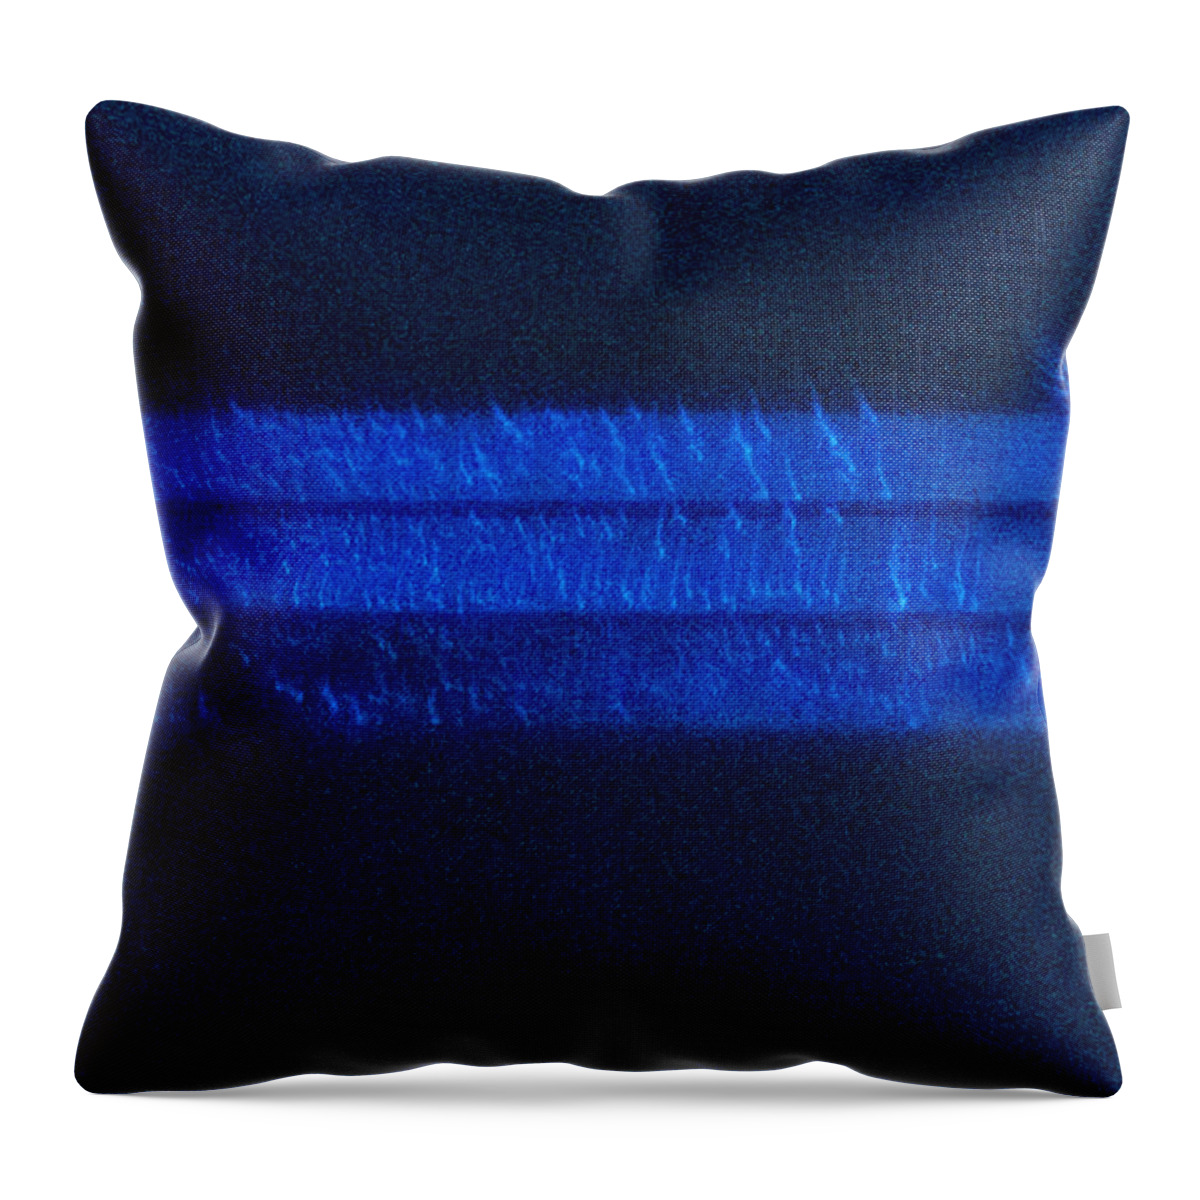 Tape Throw Pillow featuring the photograph Triboluminescence Of Tape #1 by Ted Kinsman